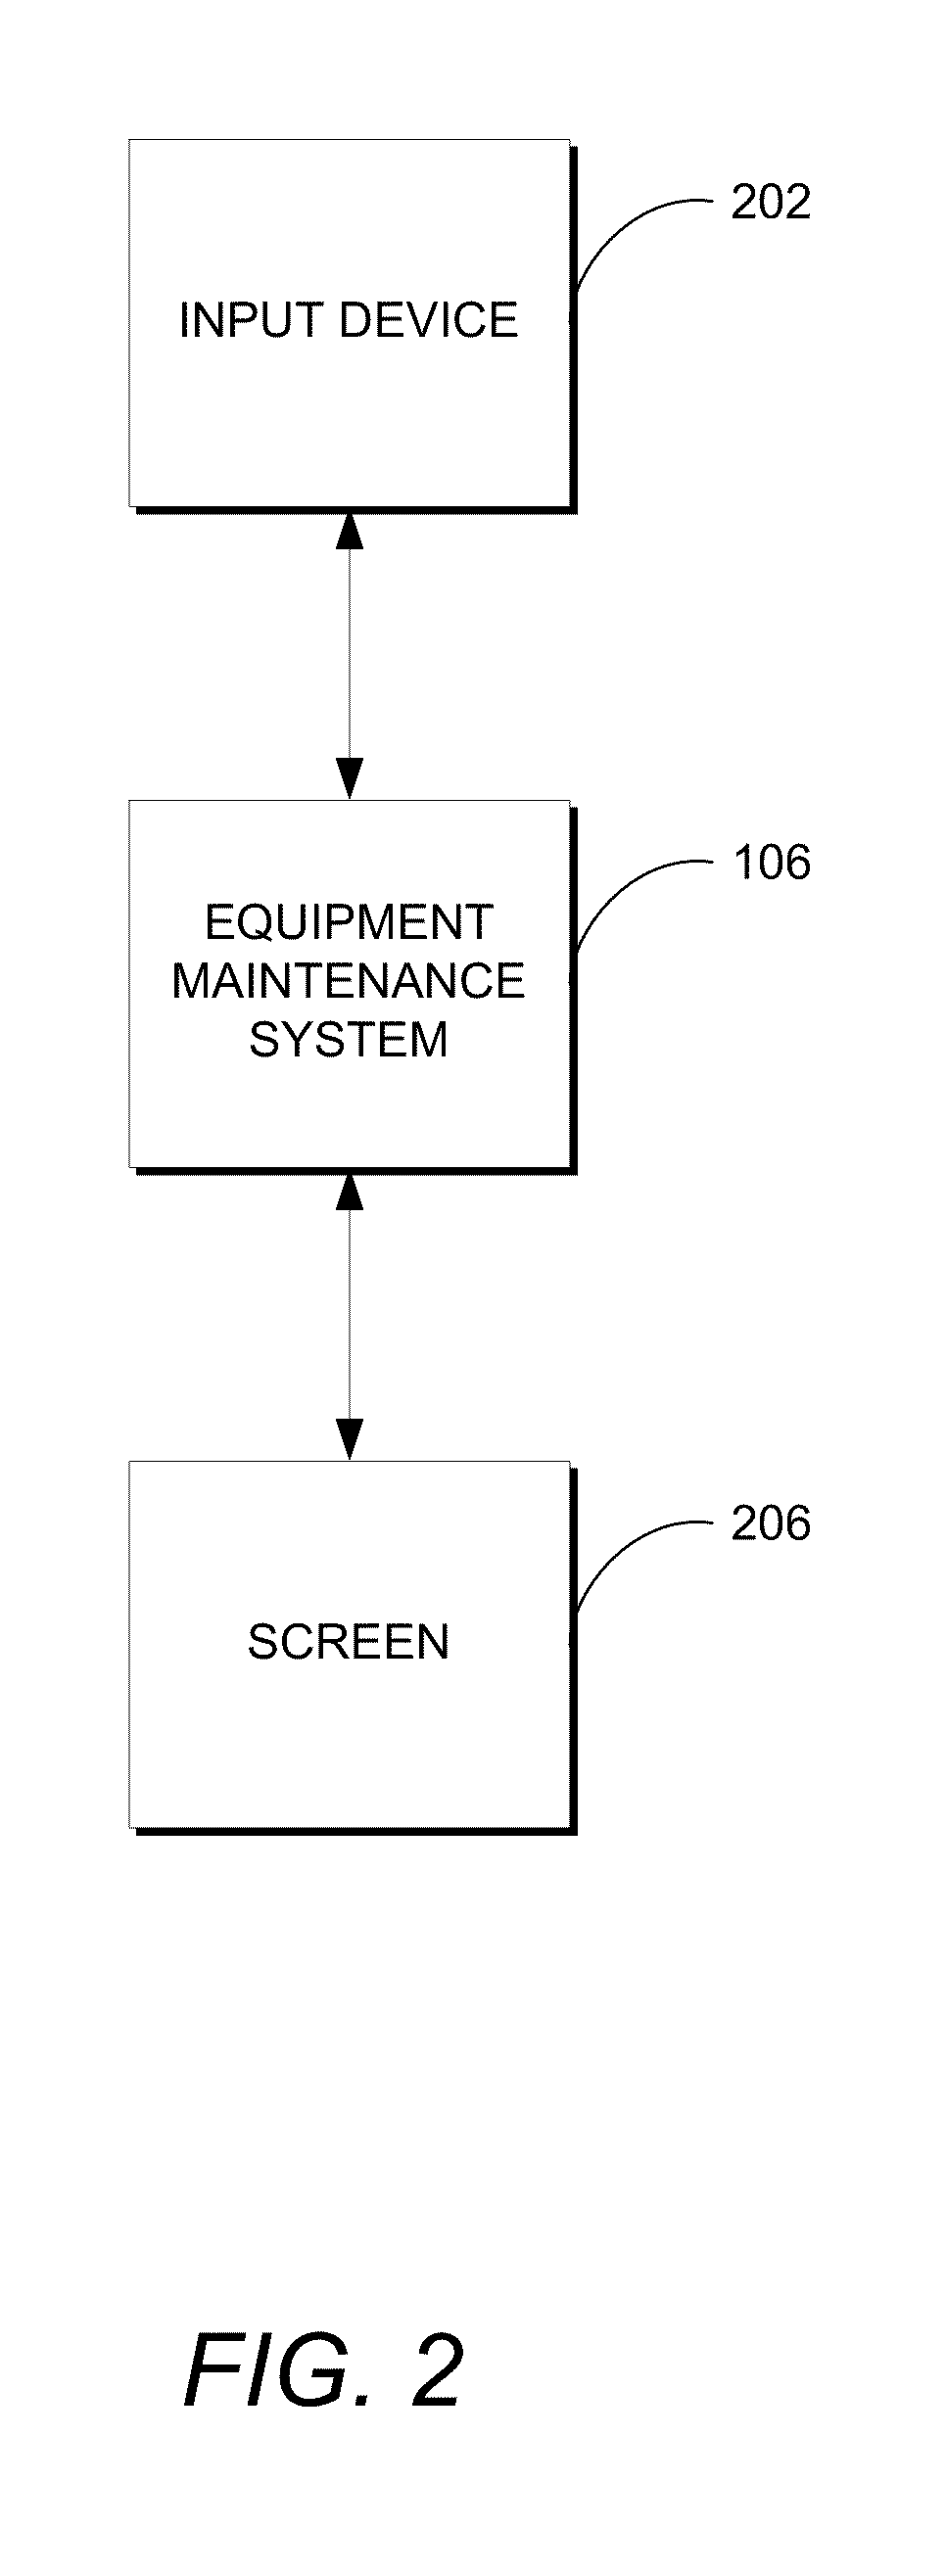 Systems and methods for analyzing equipment failures and maintenance schedules